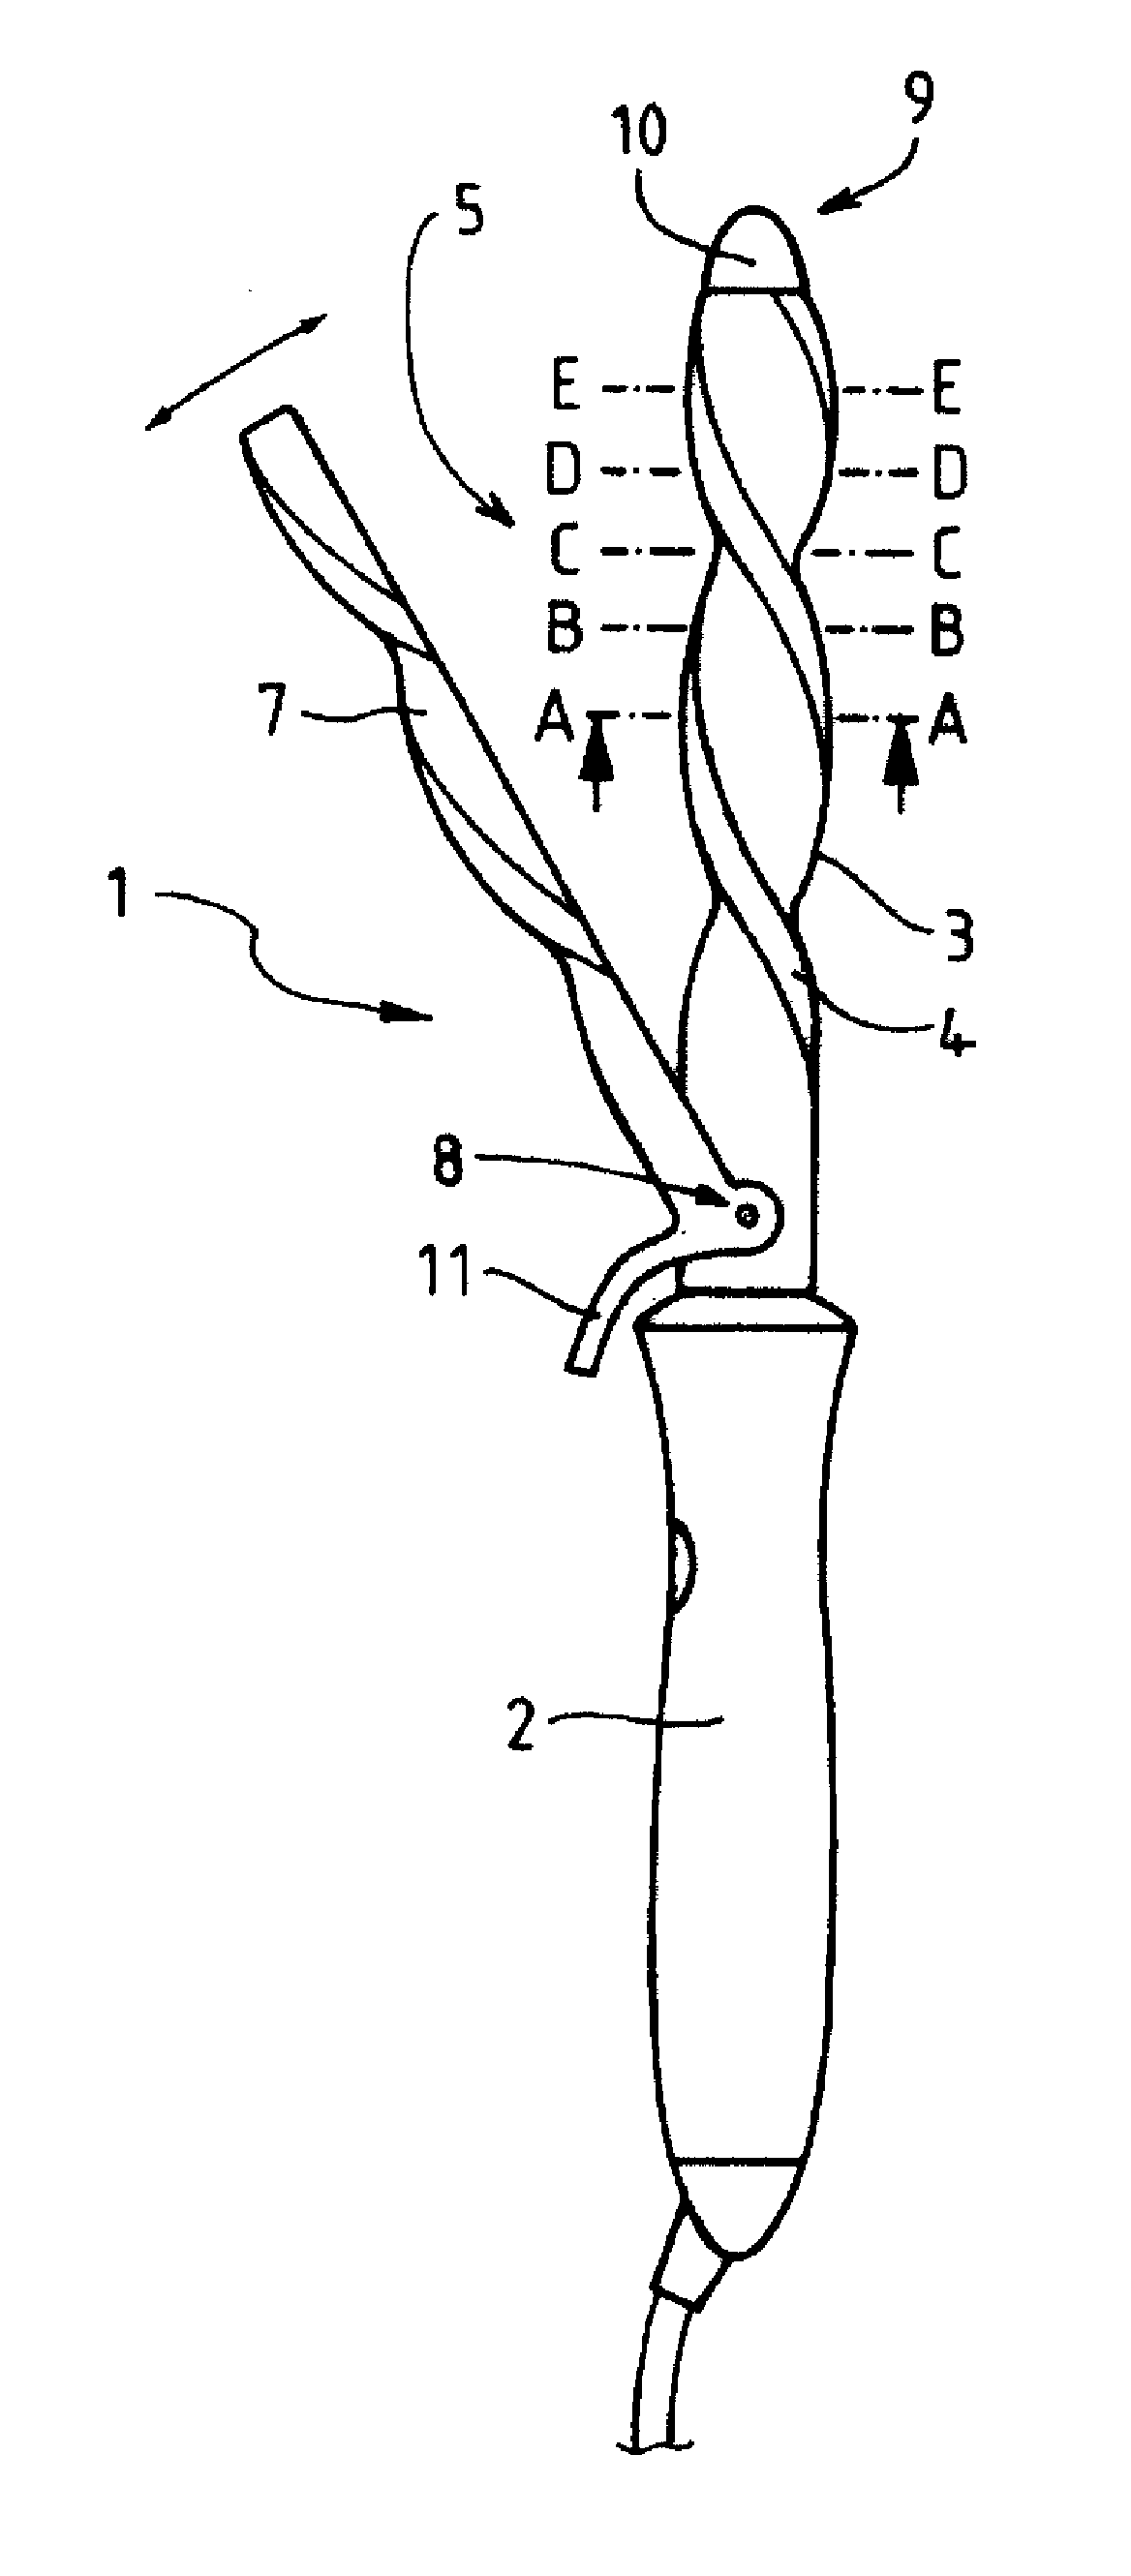 Hair shaping device